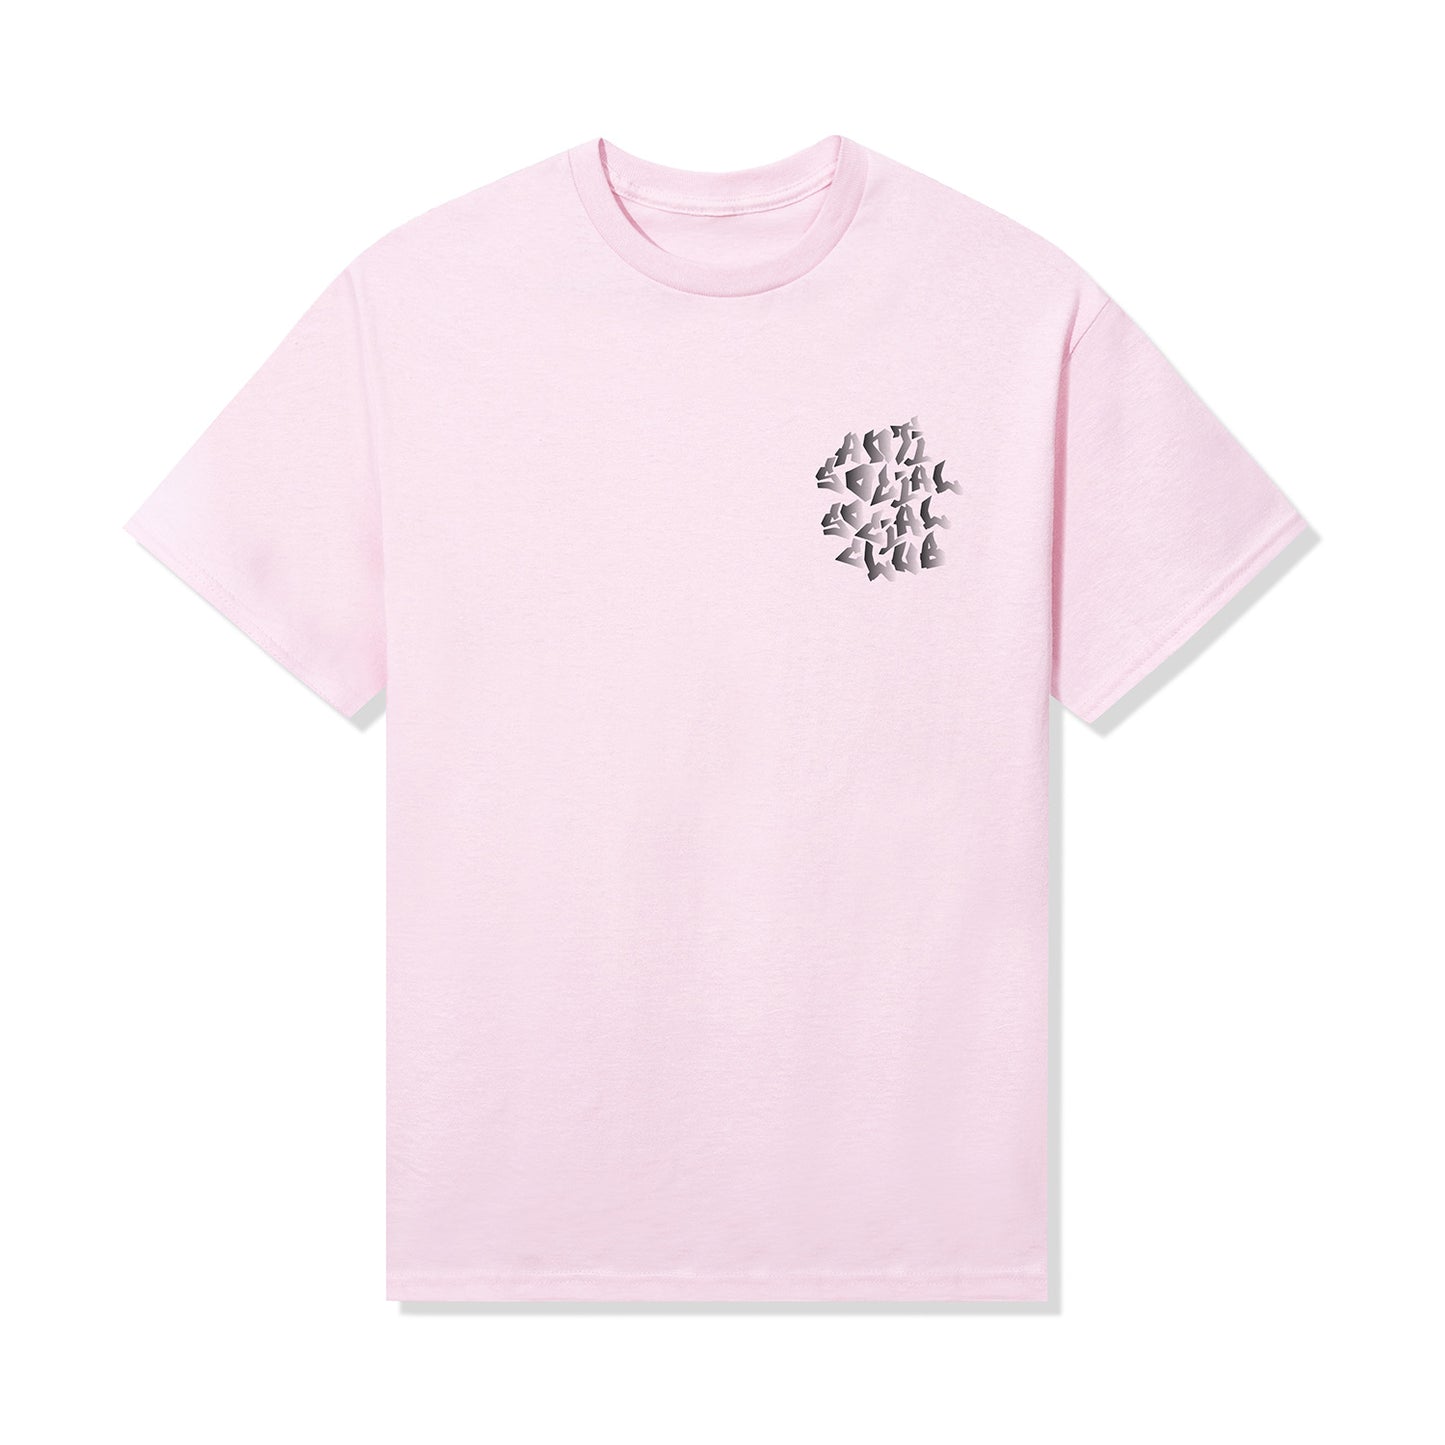 assc-cry-out-loud-tee-pale-pink-front